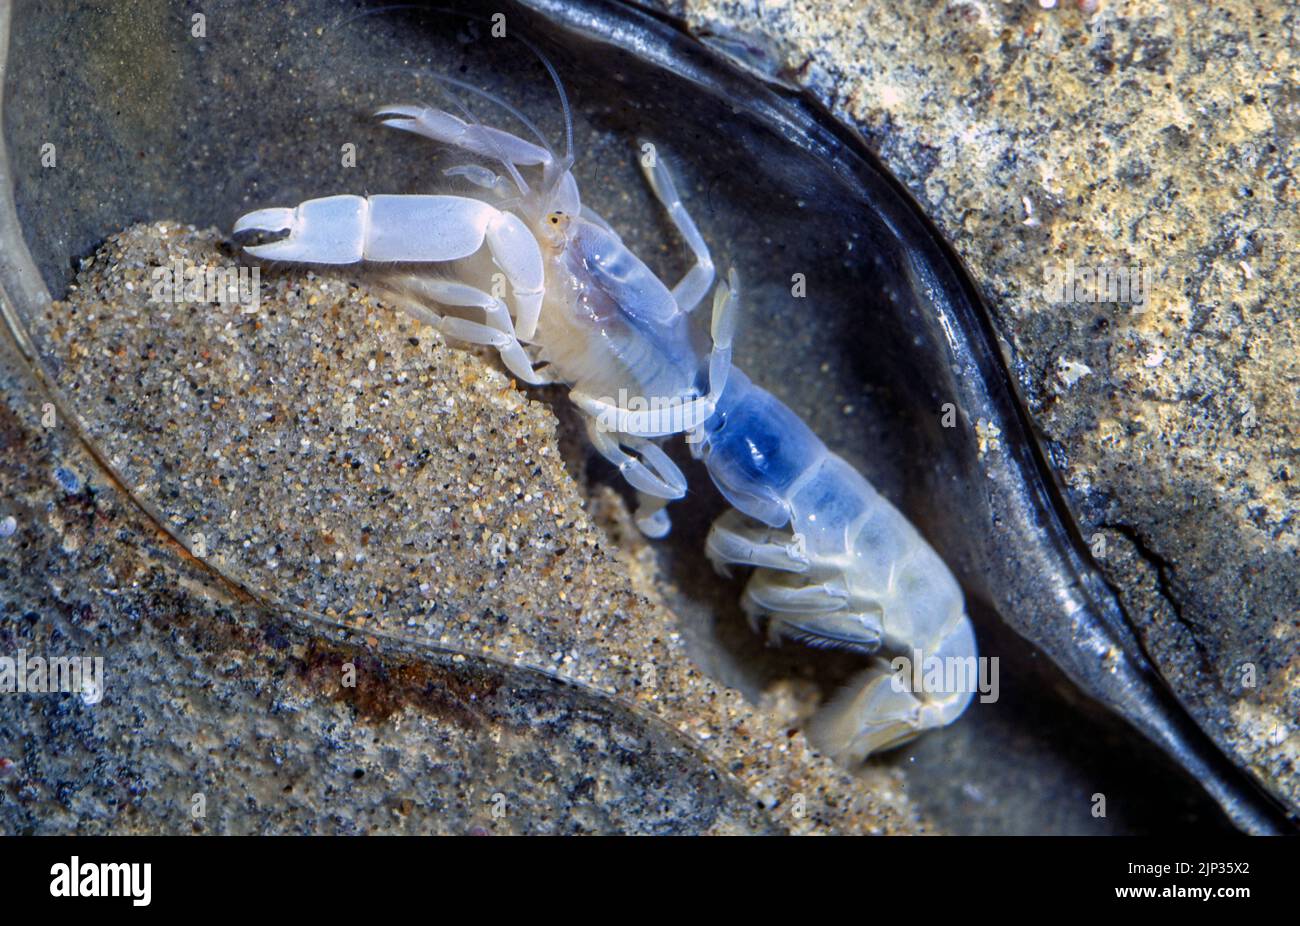 Bay ghost shrimp (Neotrypaea californiensis) Stock Photo